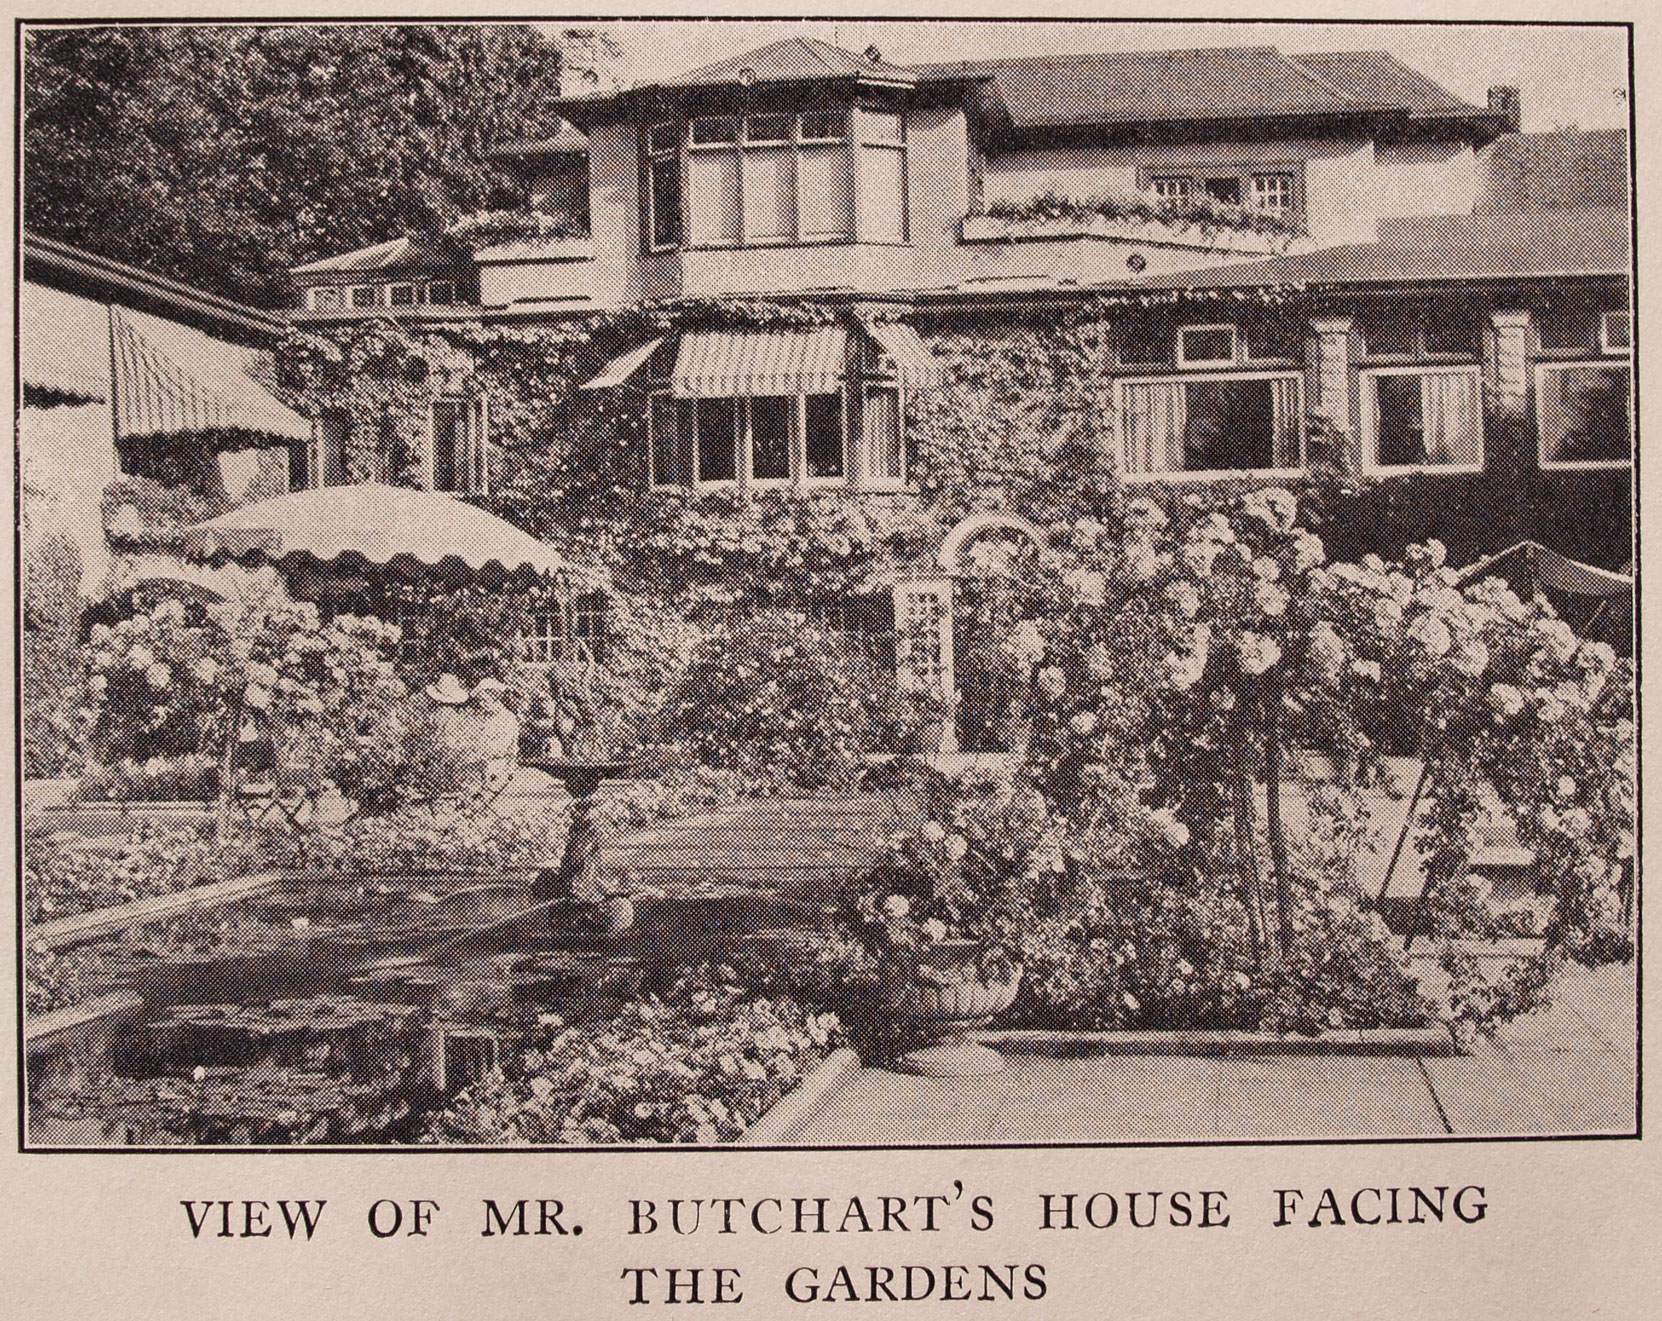 The Italian Garden, 1932. This photo appeared in Robert Davis' book, Canadian Cavalcade (Author's collection)